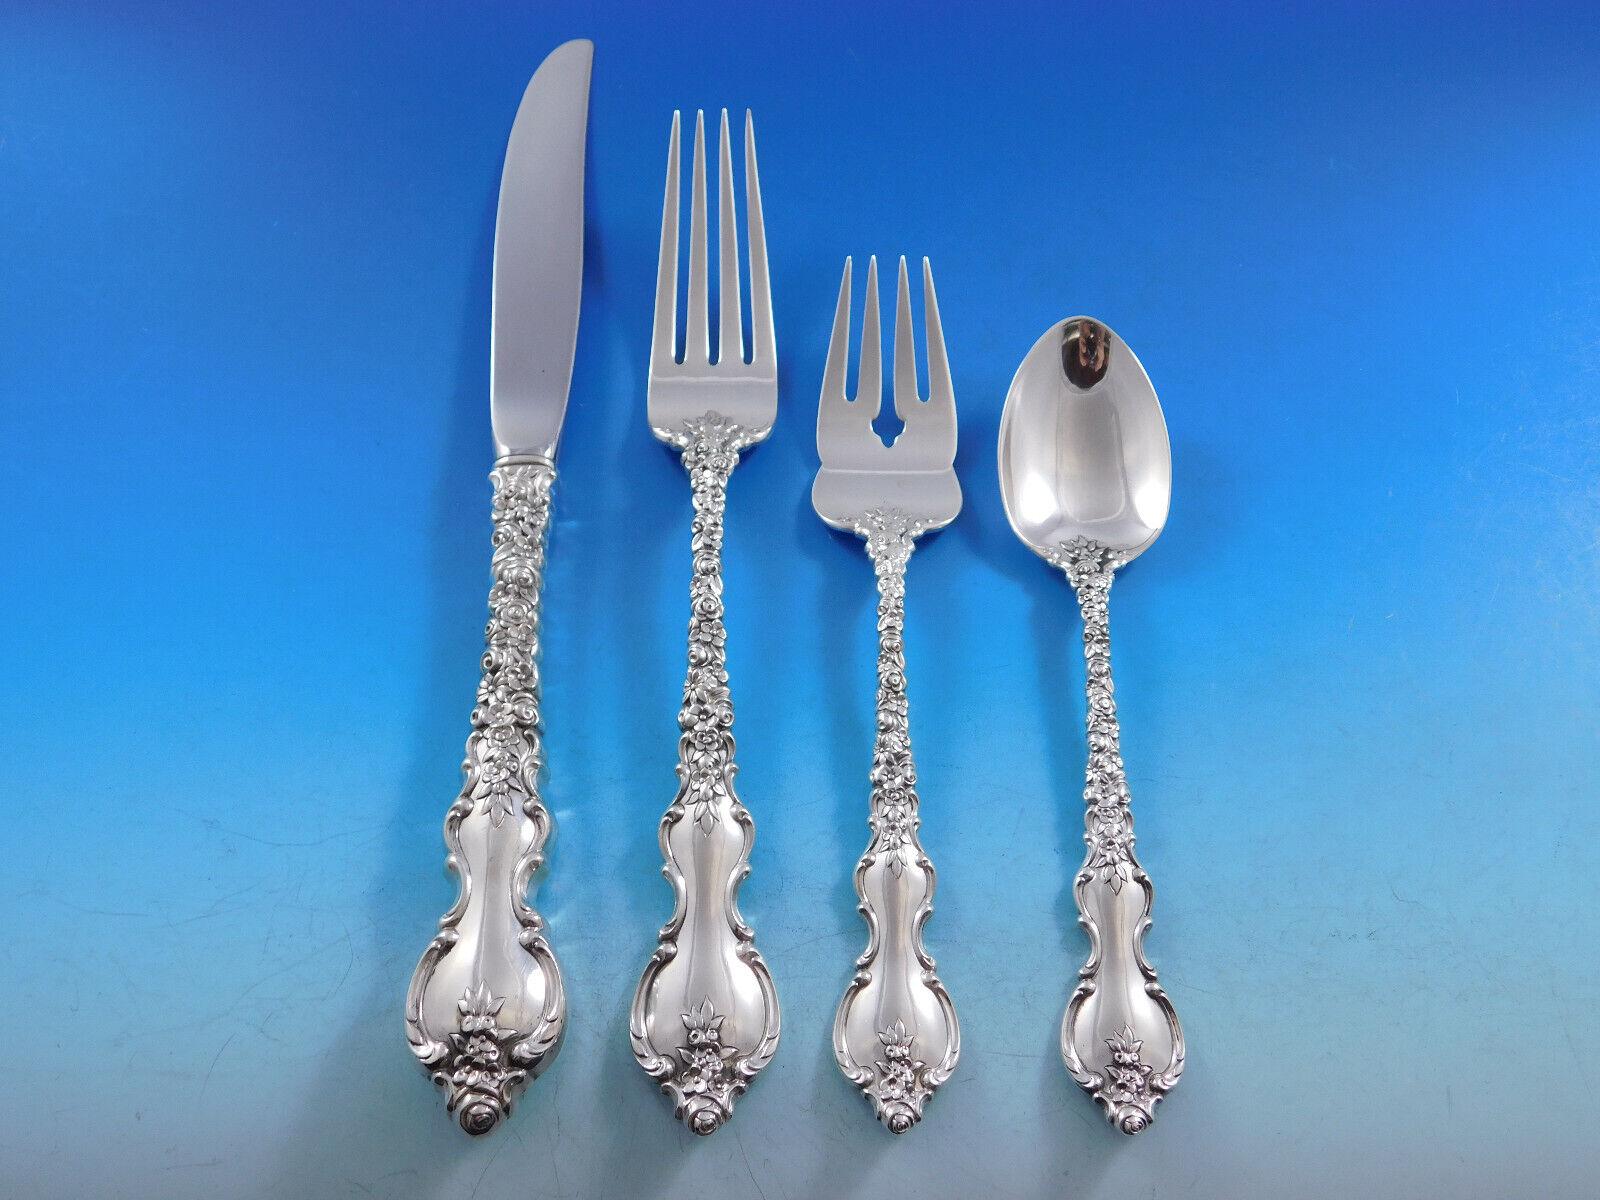 Du Barry by International Sterling Silver Flatware Service 12 Set 70 pcs Dinner In Excellent Condition For Sale In Big Bend, WI